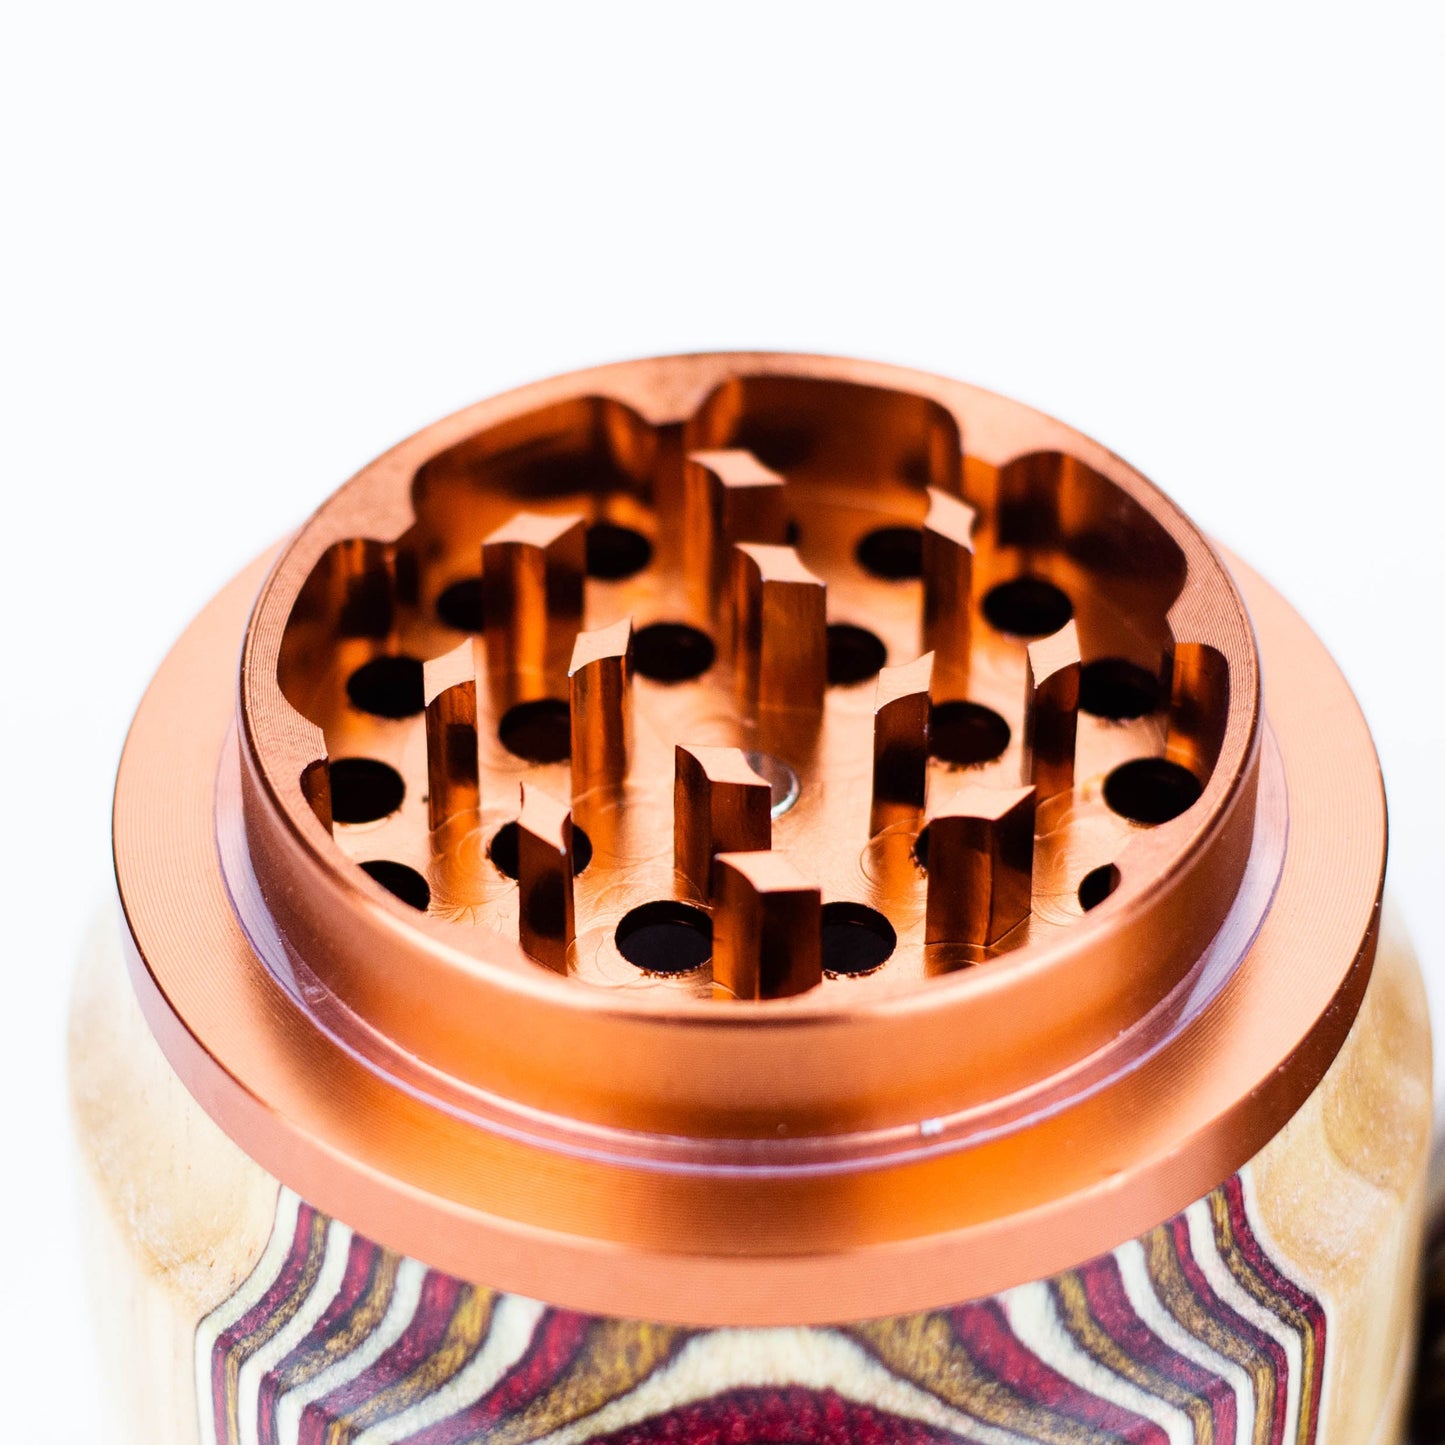 Genie 4 parts wooden cover grinder [SS147]